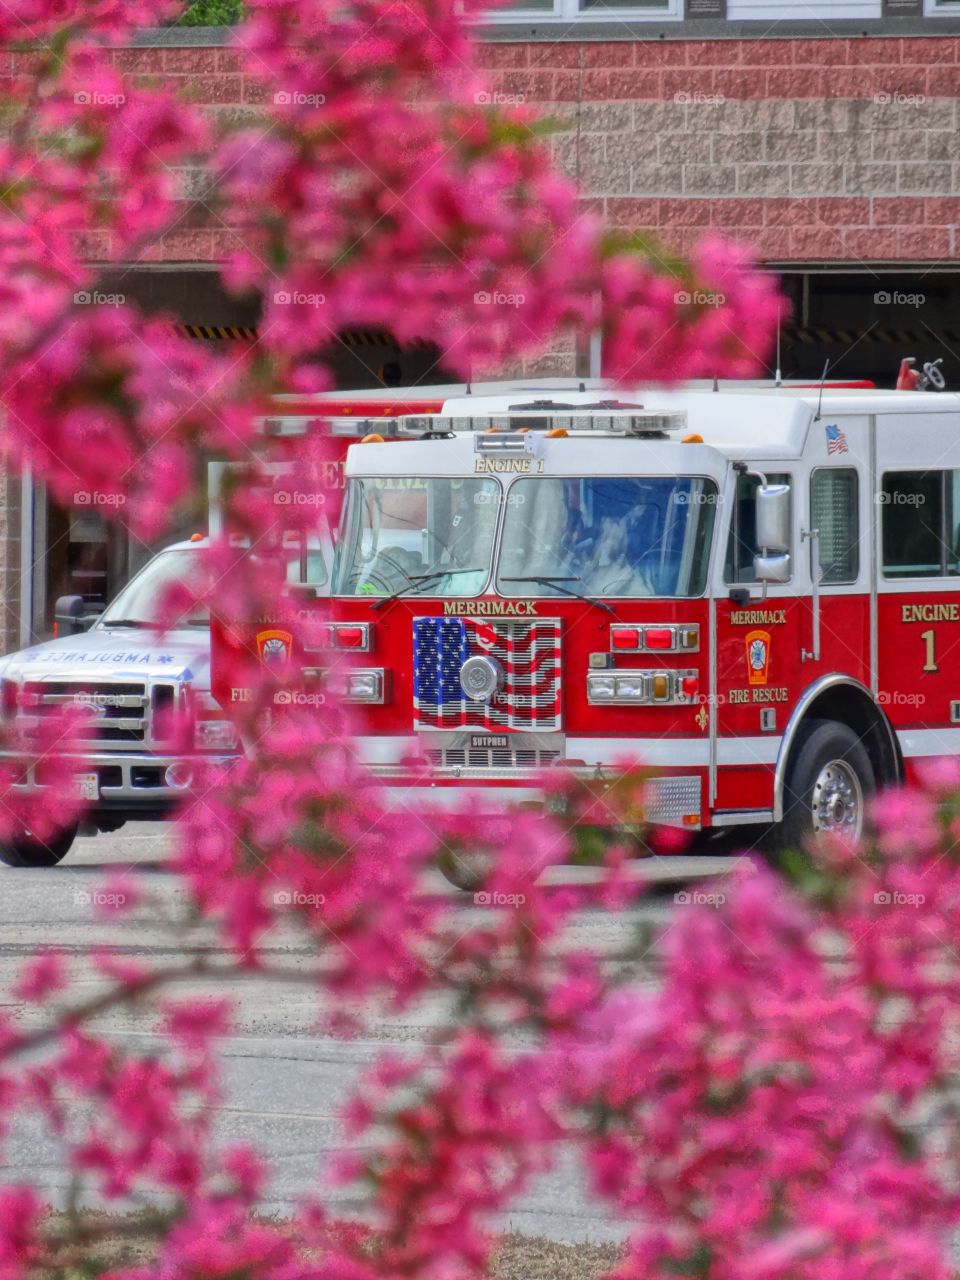 Merrimack's finest fire department. A salute to the fire fighters on this beautiful spring day. While we battle spring allergens, they fight to save our lives and homes! three cheers!!